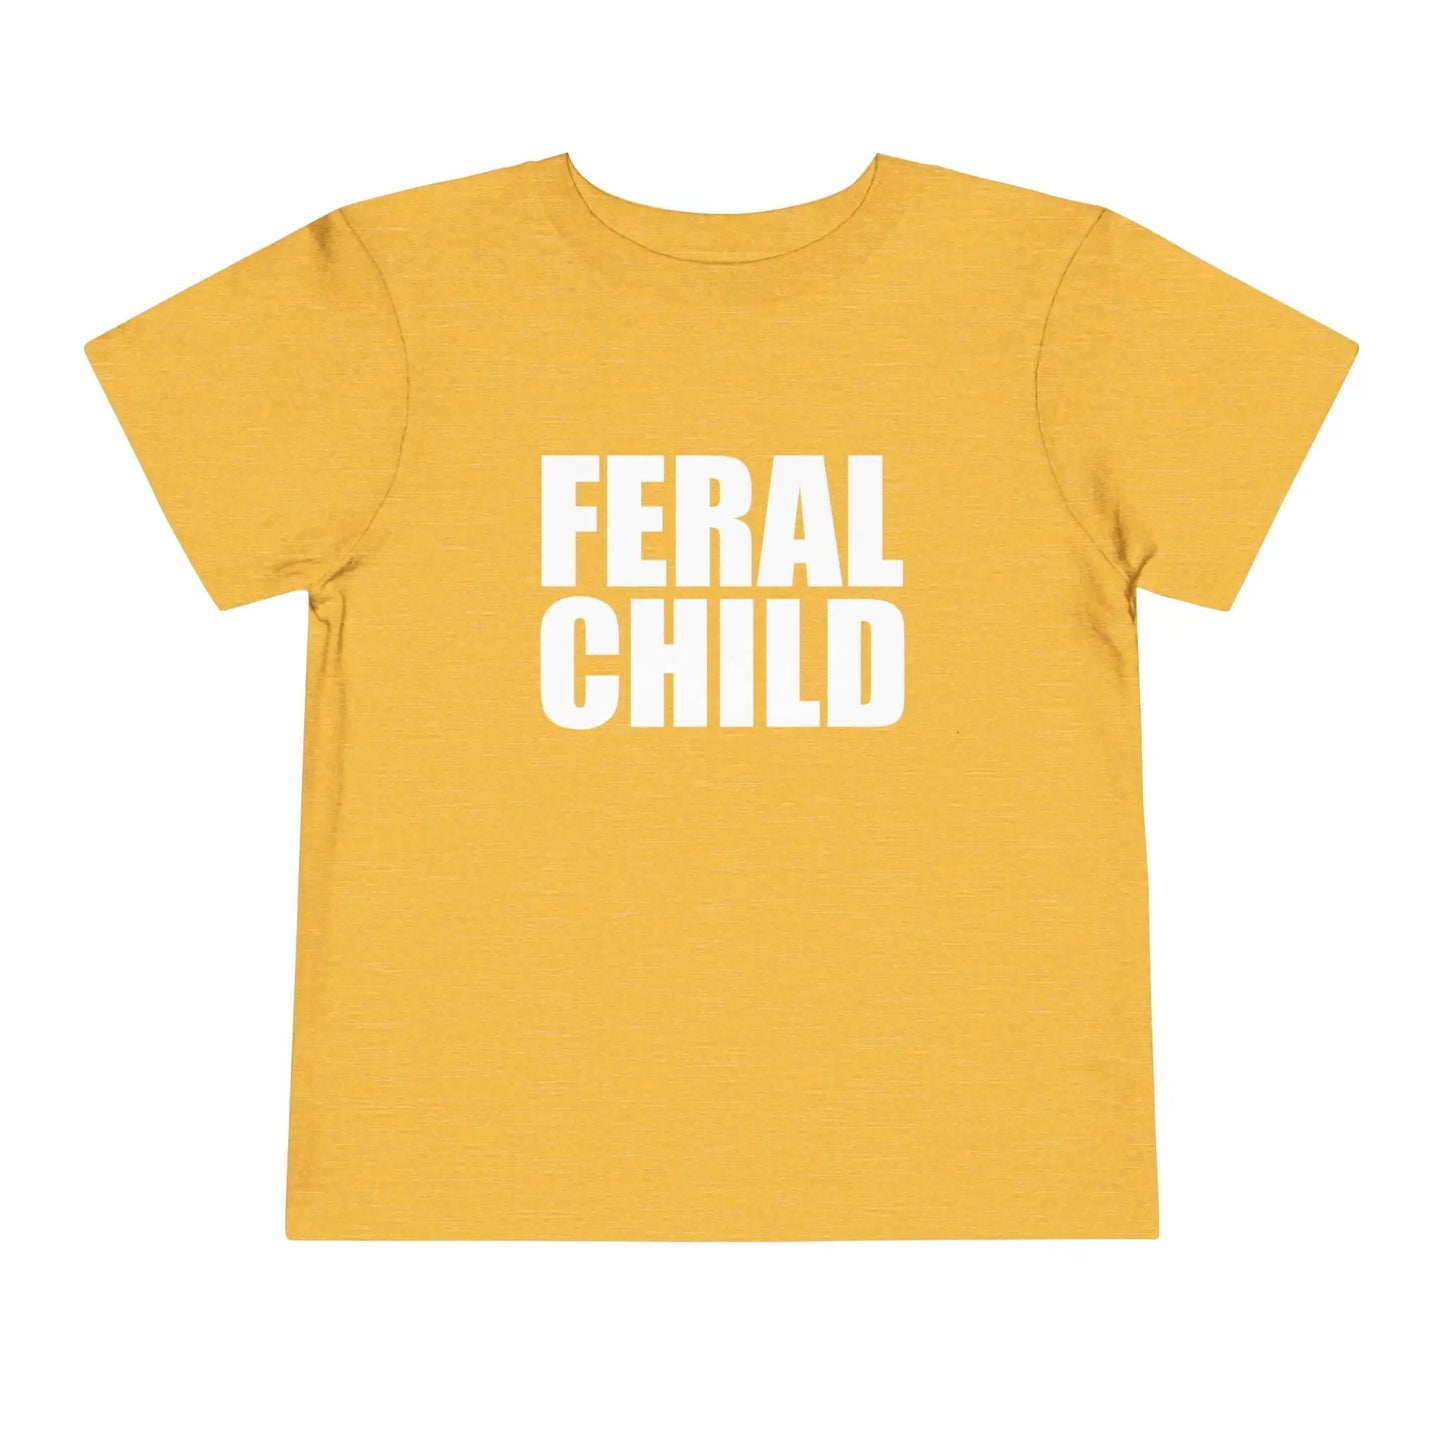 Feral Child Toddler Tee - Wicked Tees